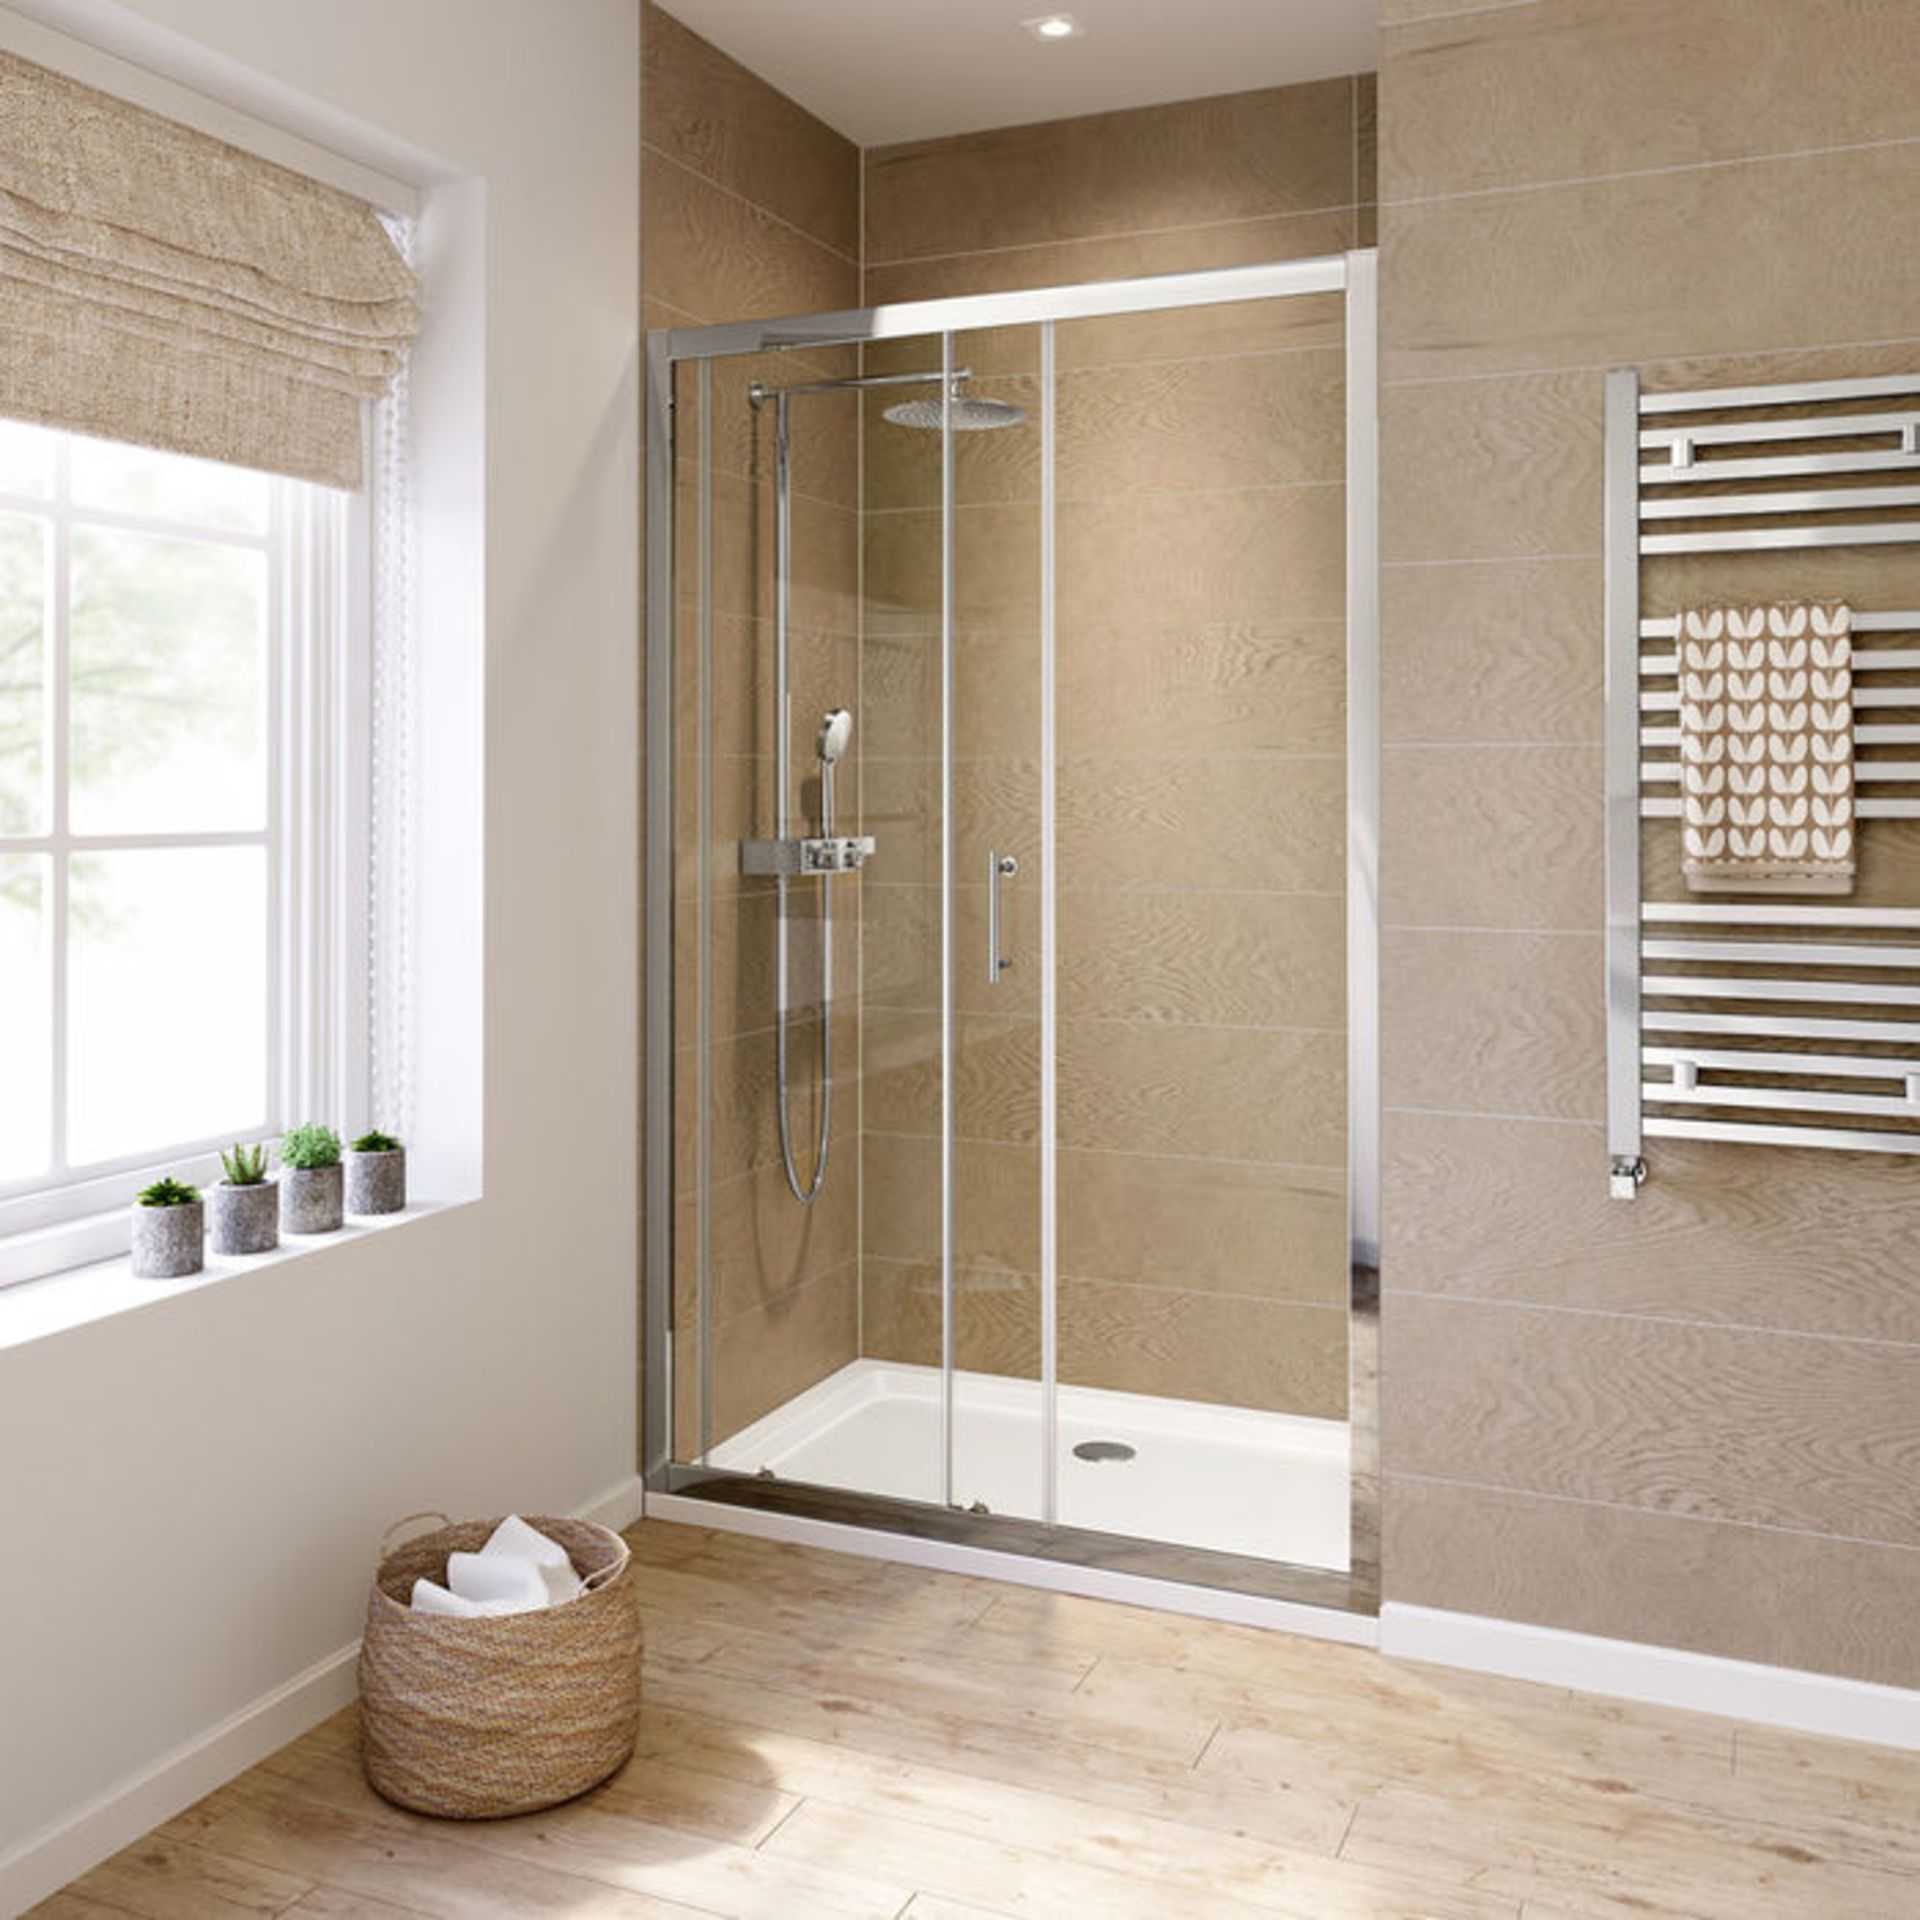 (PO145) 1200mm - 6mm - Elements Sliding Shower Door. RRP £299.99. 6mm Safety GlassFully waterproof - Image 2 of 2